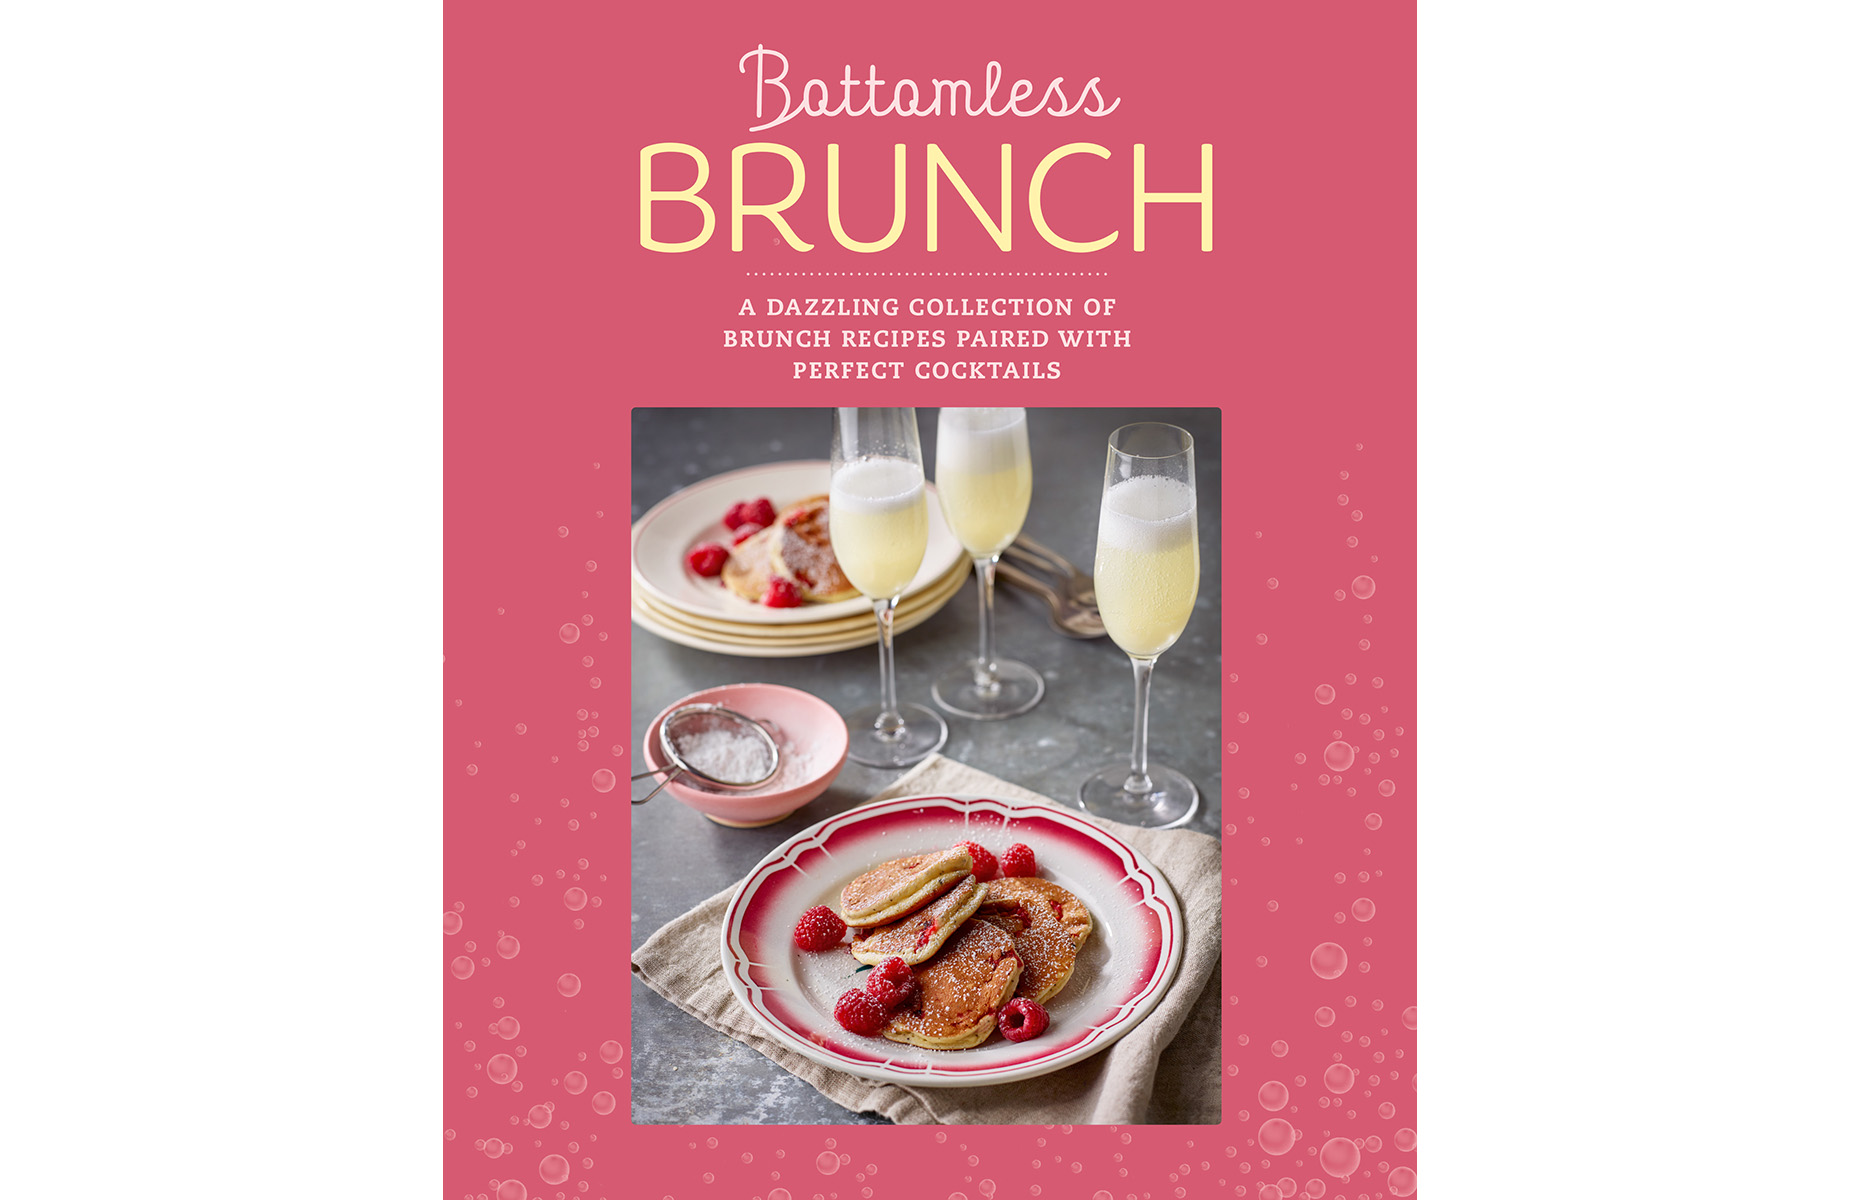 Bottomless Brunch: A Dazzling Collection of Brunch Recipes Paired with Perfect Cocktails